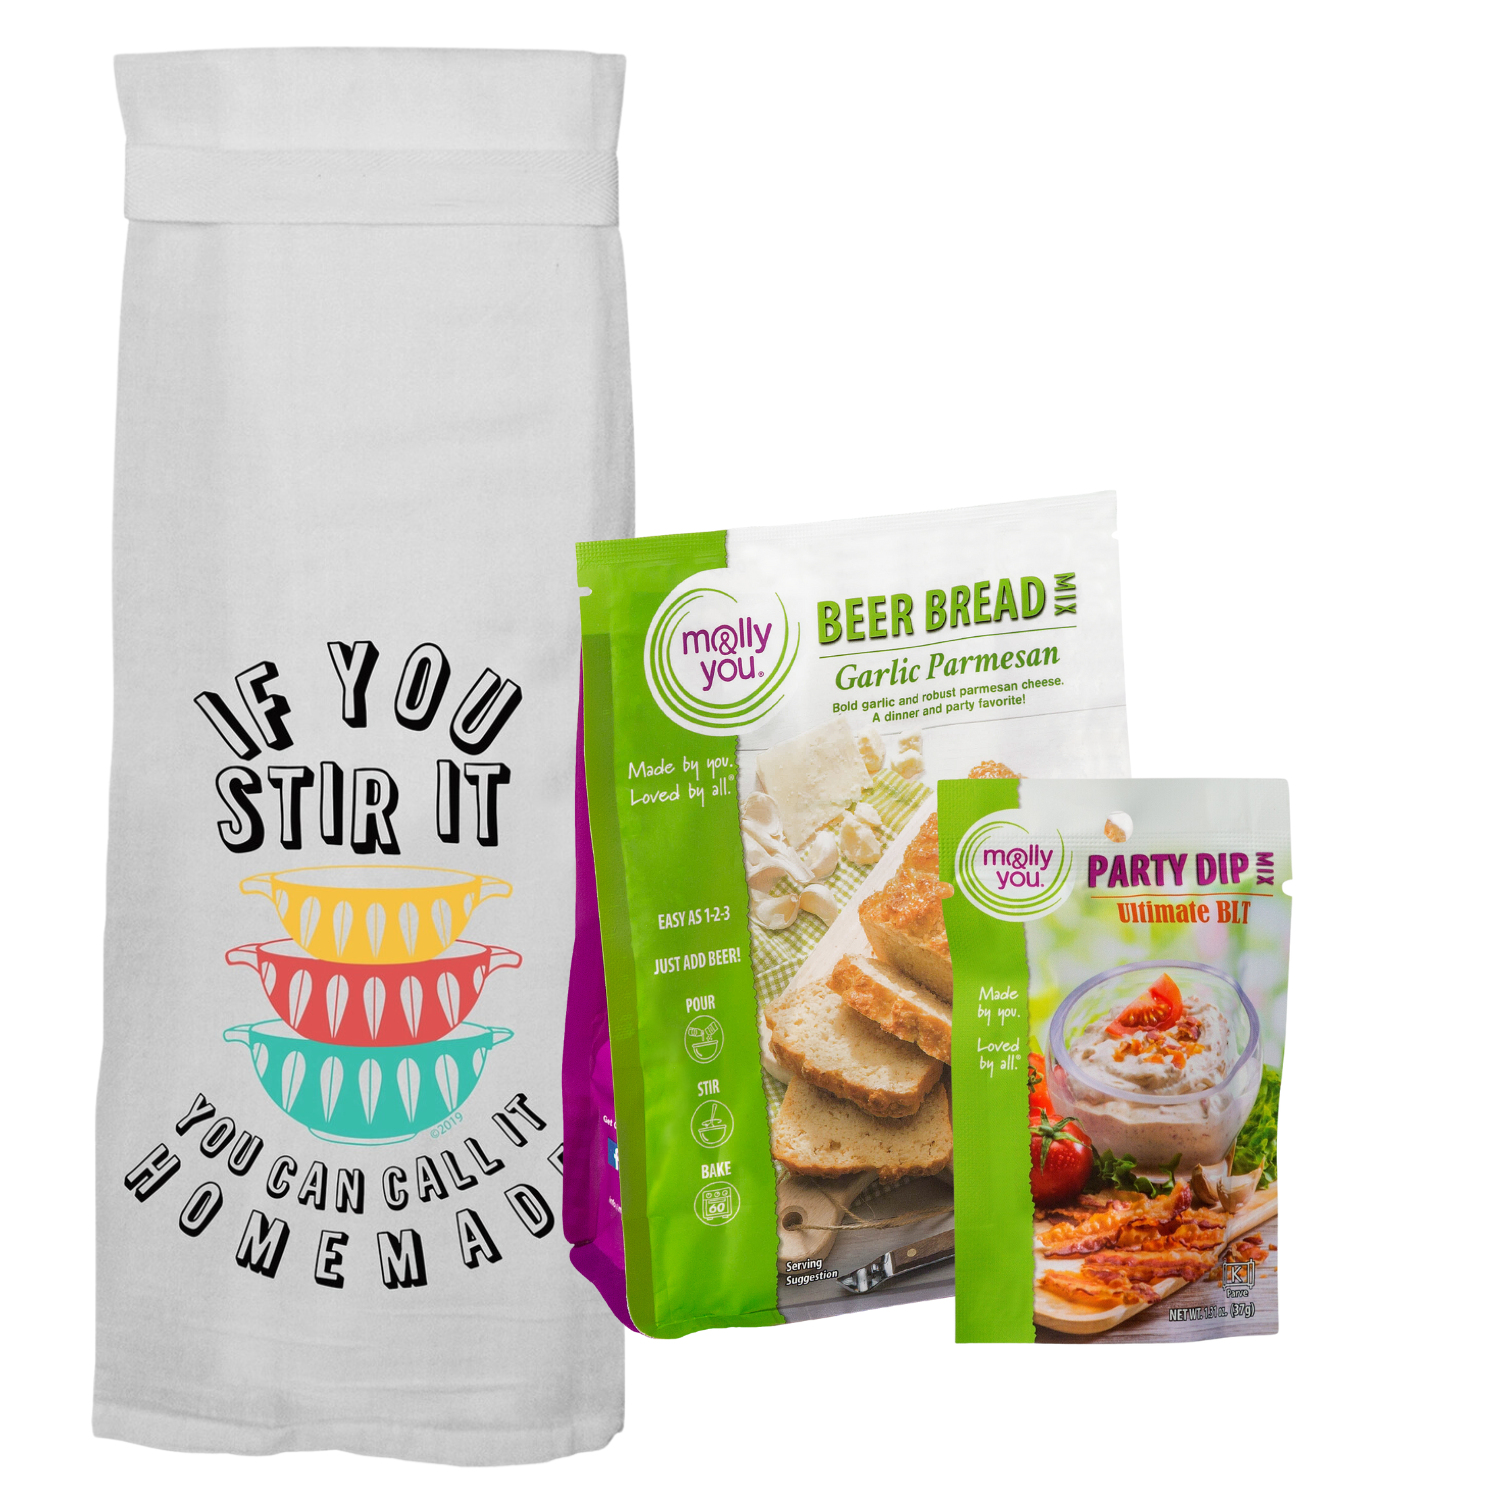 Housewarming Gift - This bundles includes 1 Hang Tight Towel, 1 Garlic Parmesan Beer Bread Mix, and 1 Ultimate BLT Party Dip Mix 